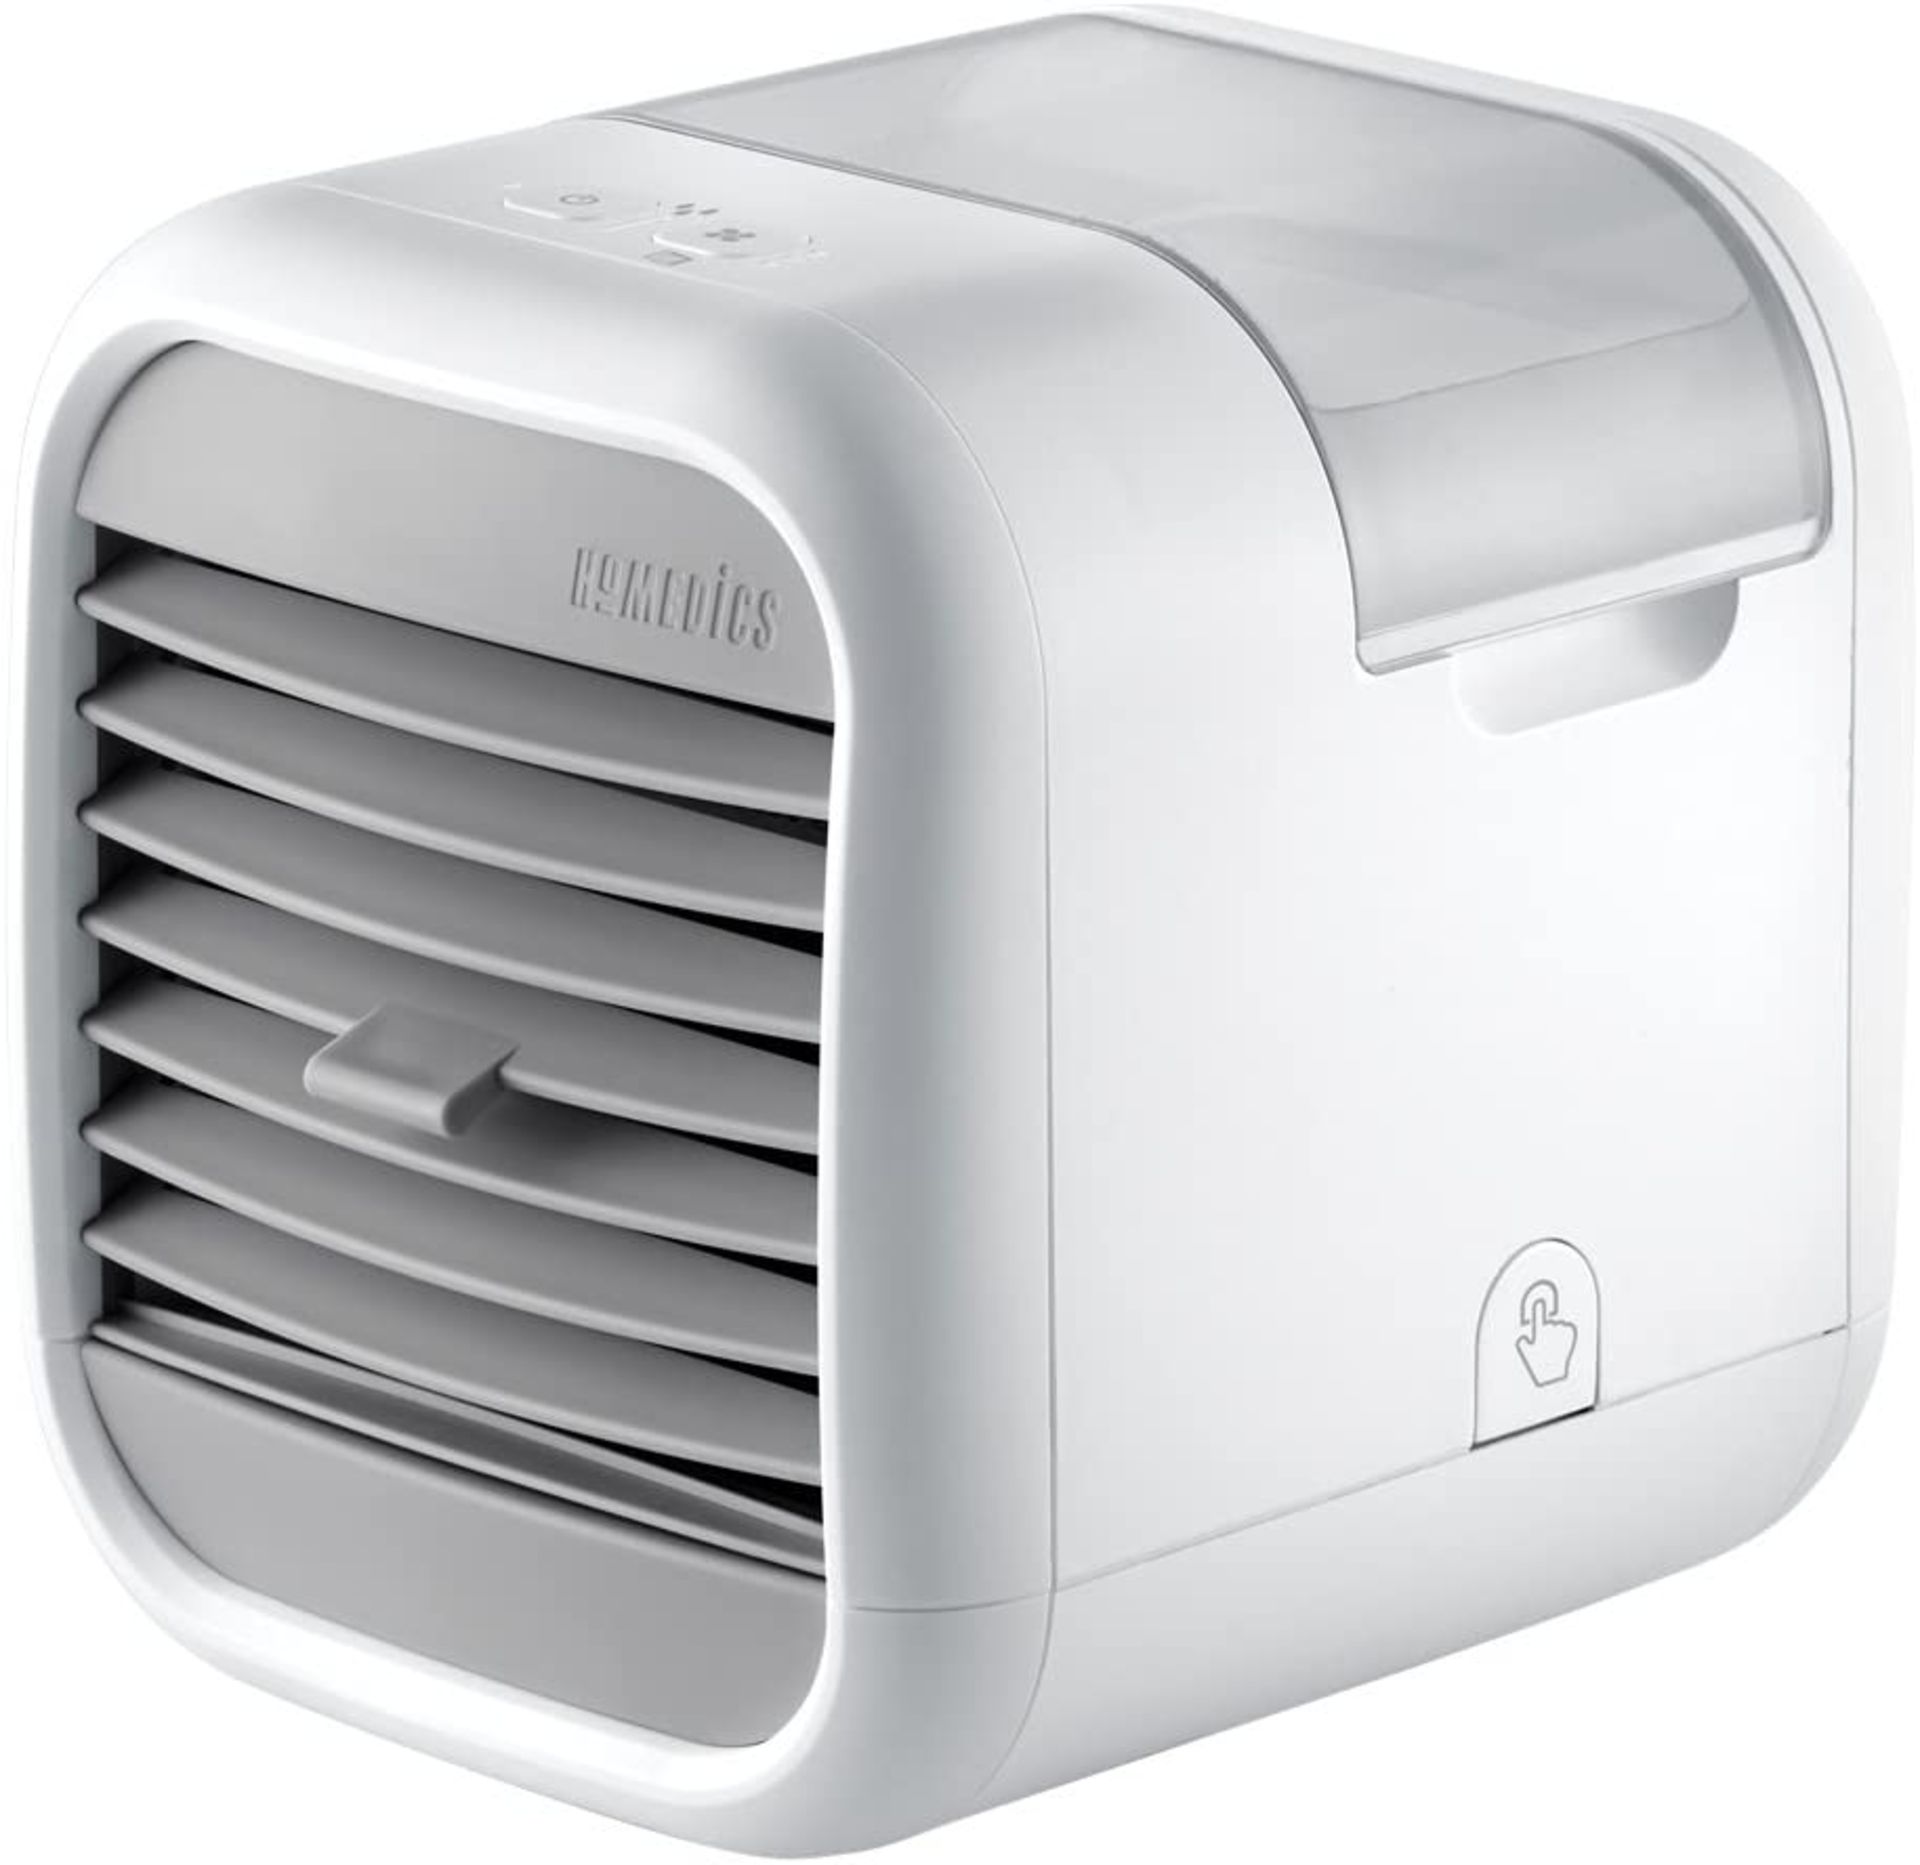 + VAT Grade A Homedics My Chill Plus Personal Space Cooler - 1.8m (6ft) Cooling Zone - Cools Your - Image 2 of 2